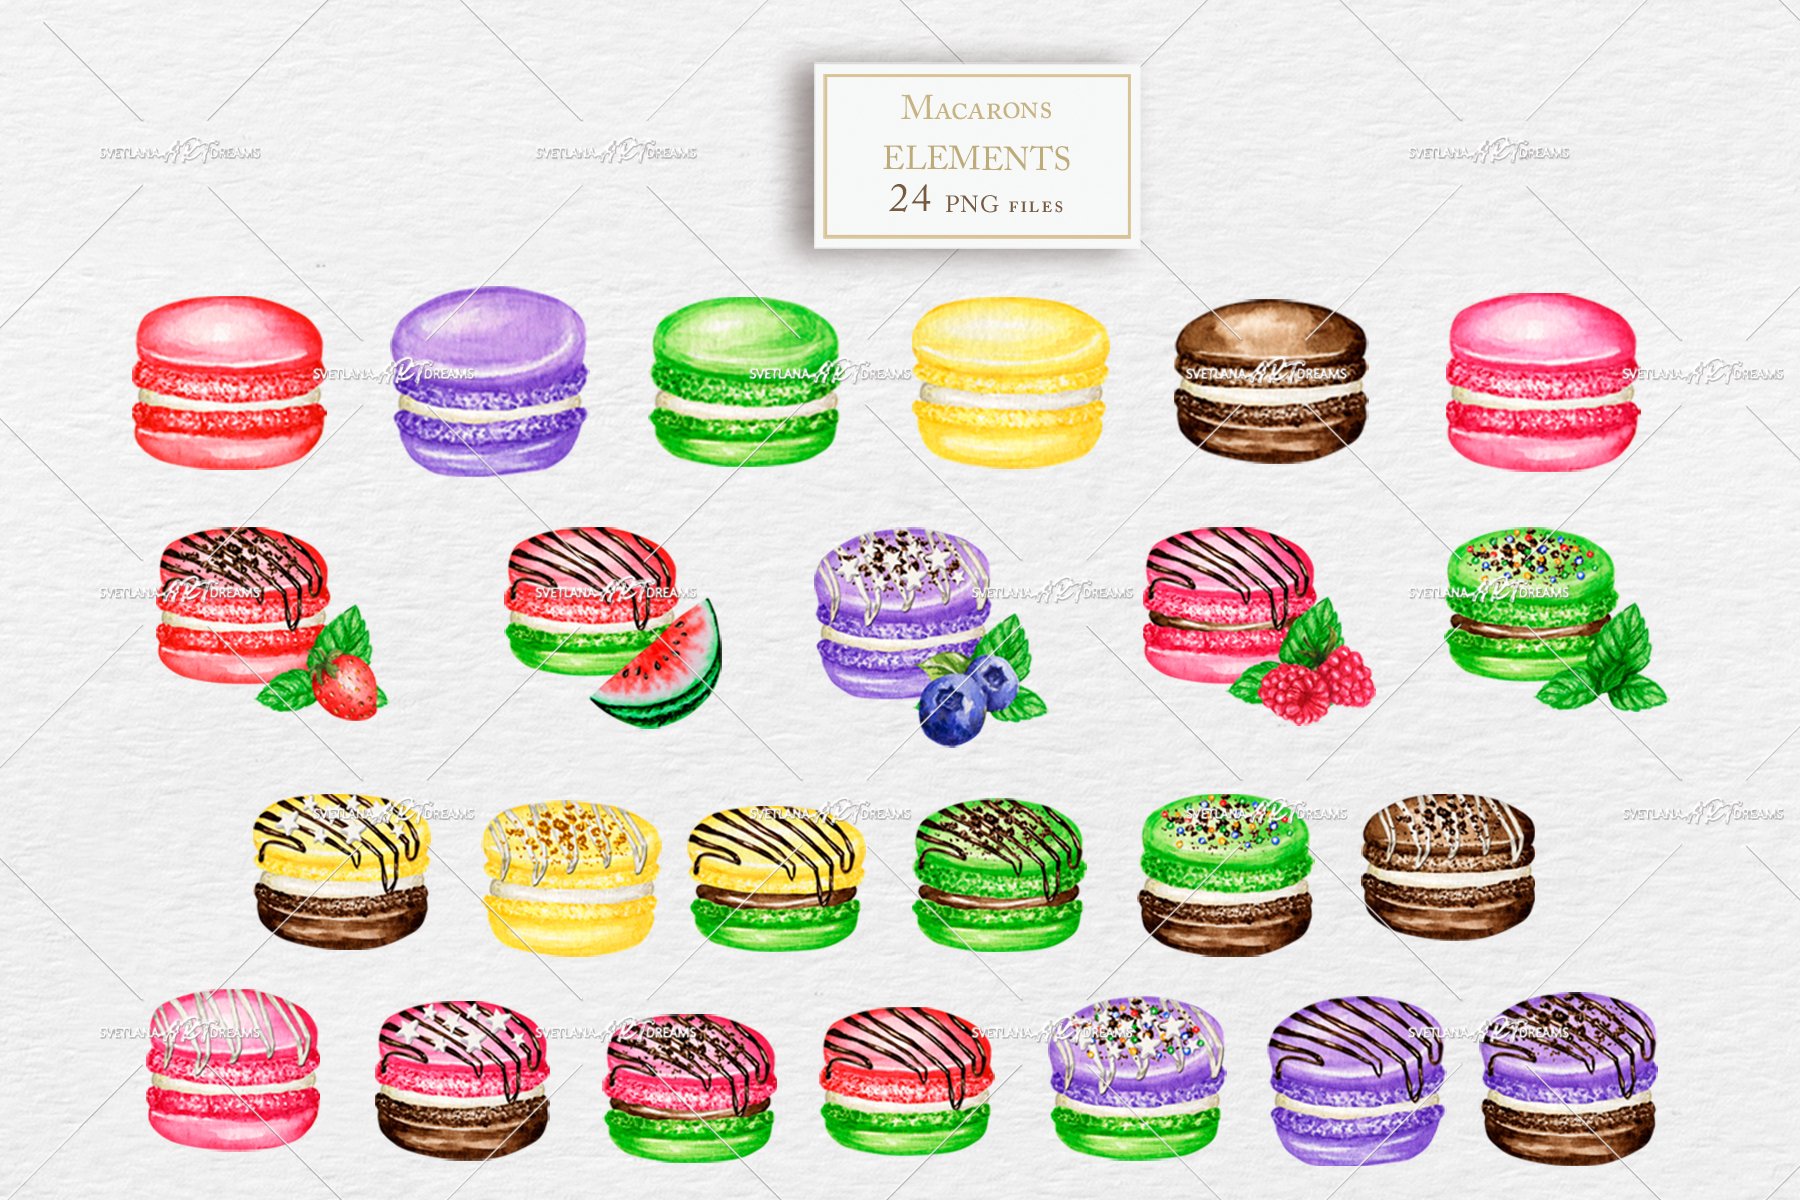 Diverse of colorful macaroons.